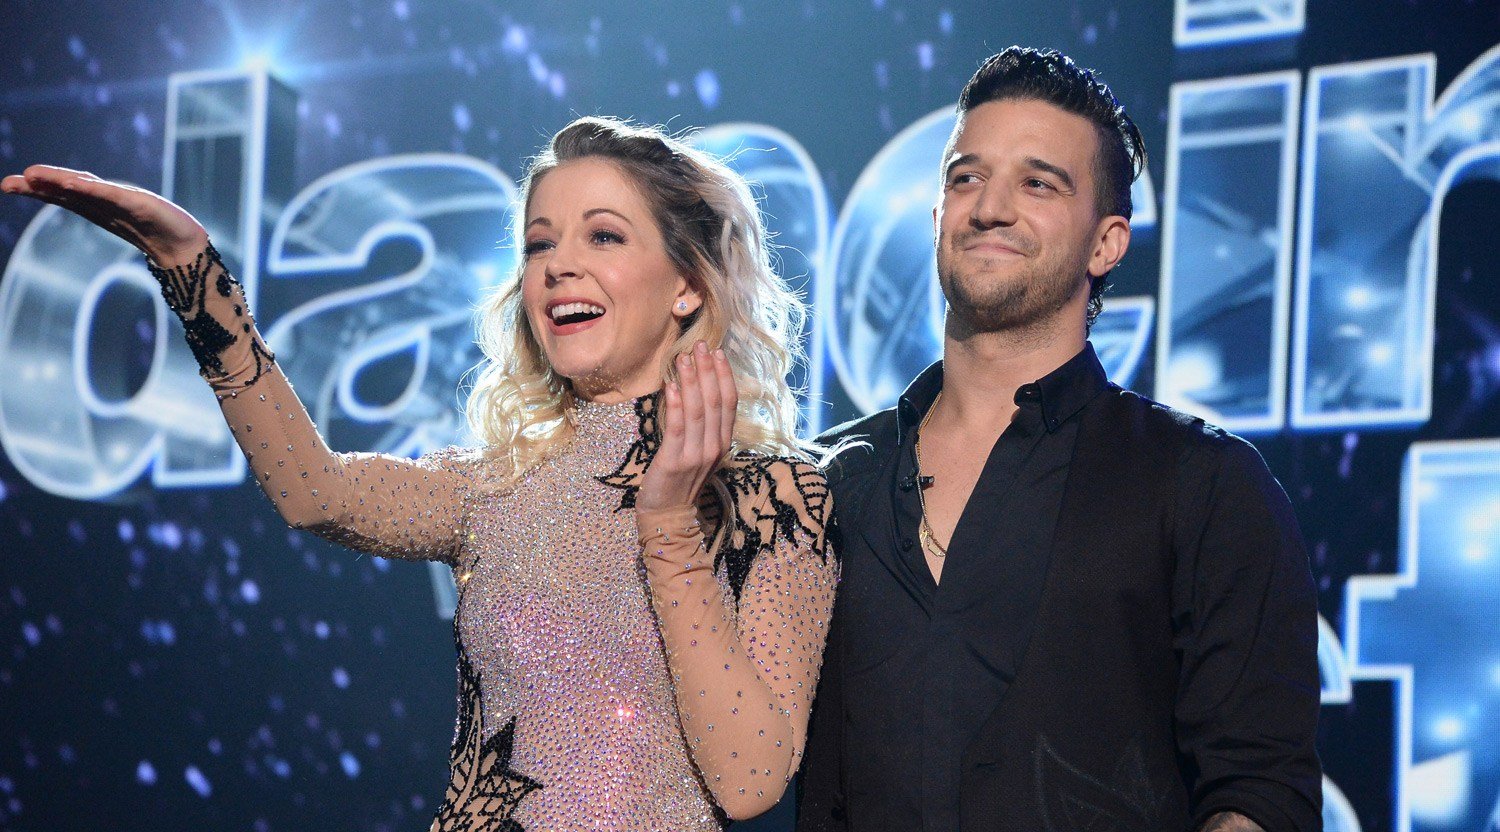 Lindsey Stirling and Mark Ballas stand next to each other on the stage